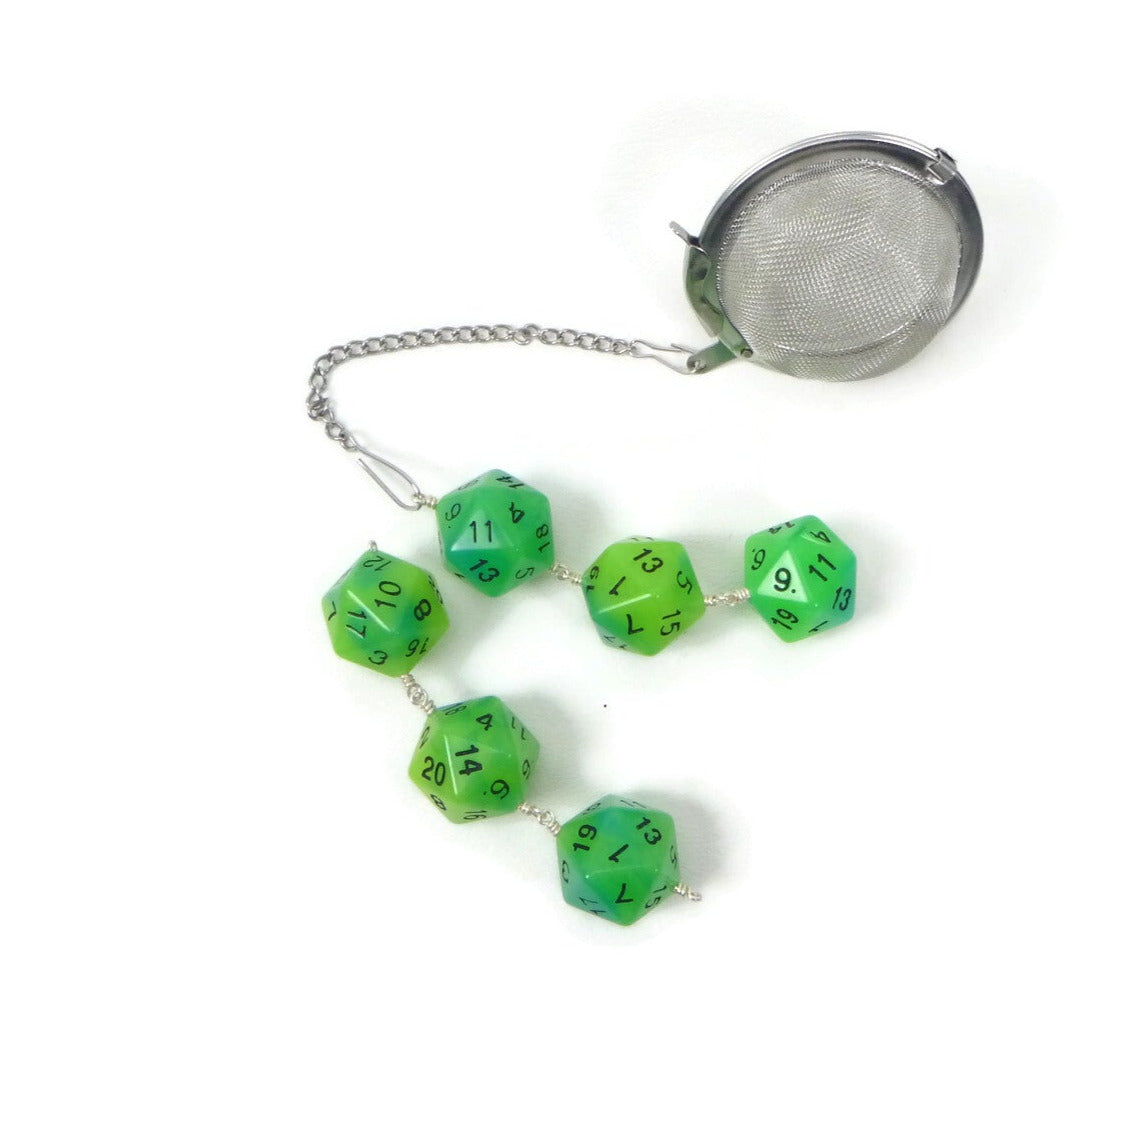 Tea Infuser with Lime Green and Teal Dice